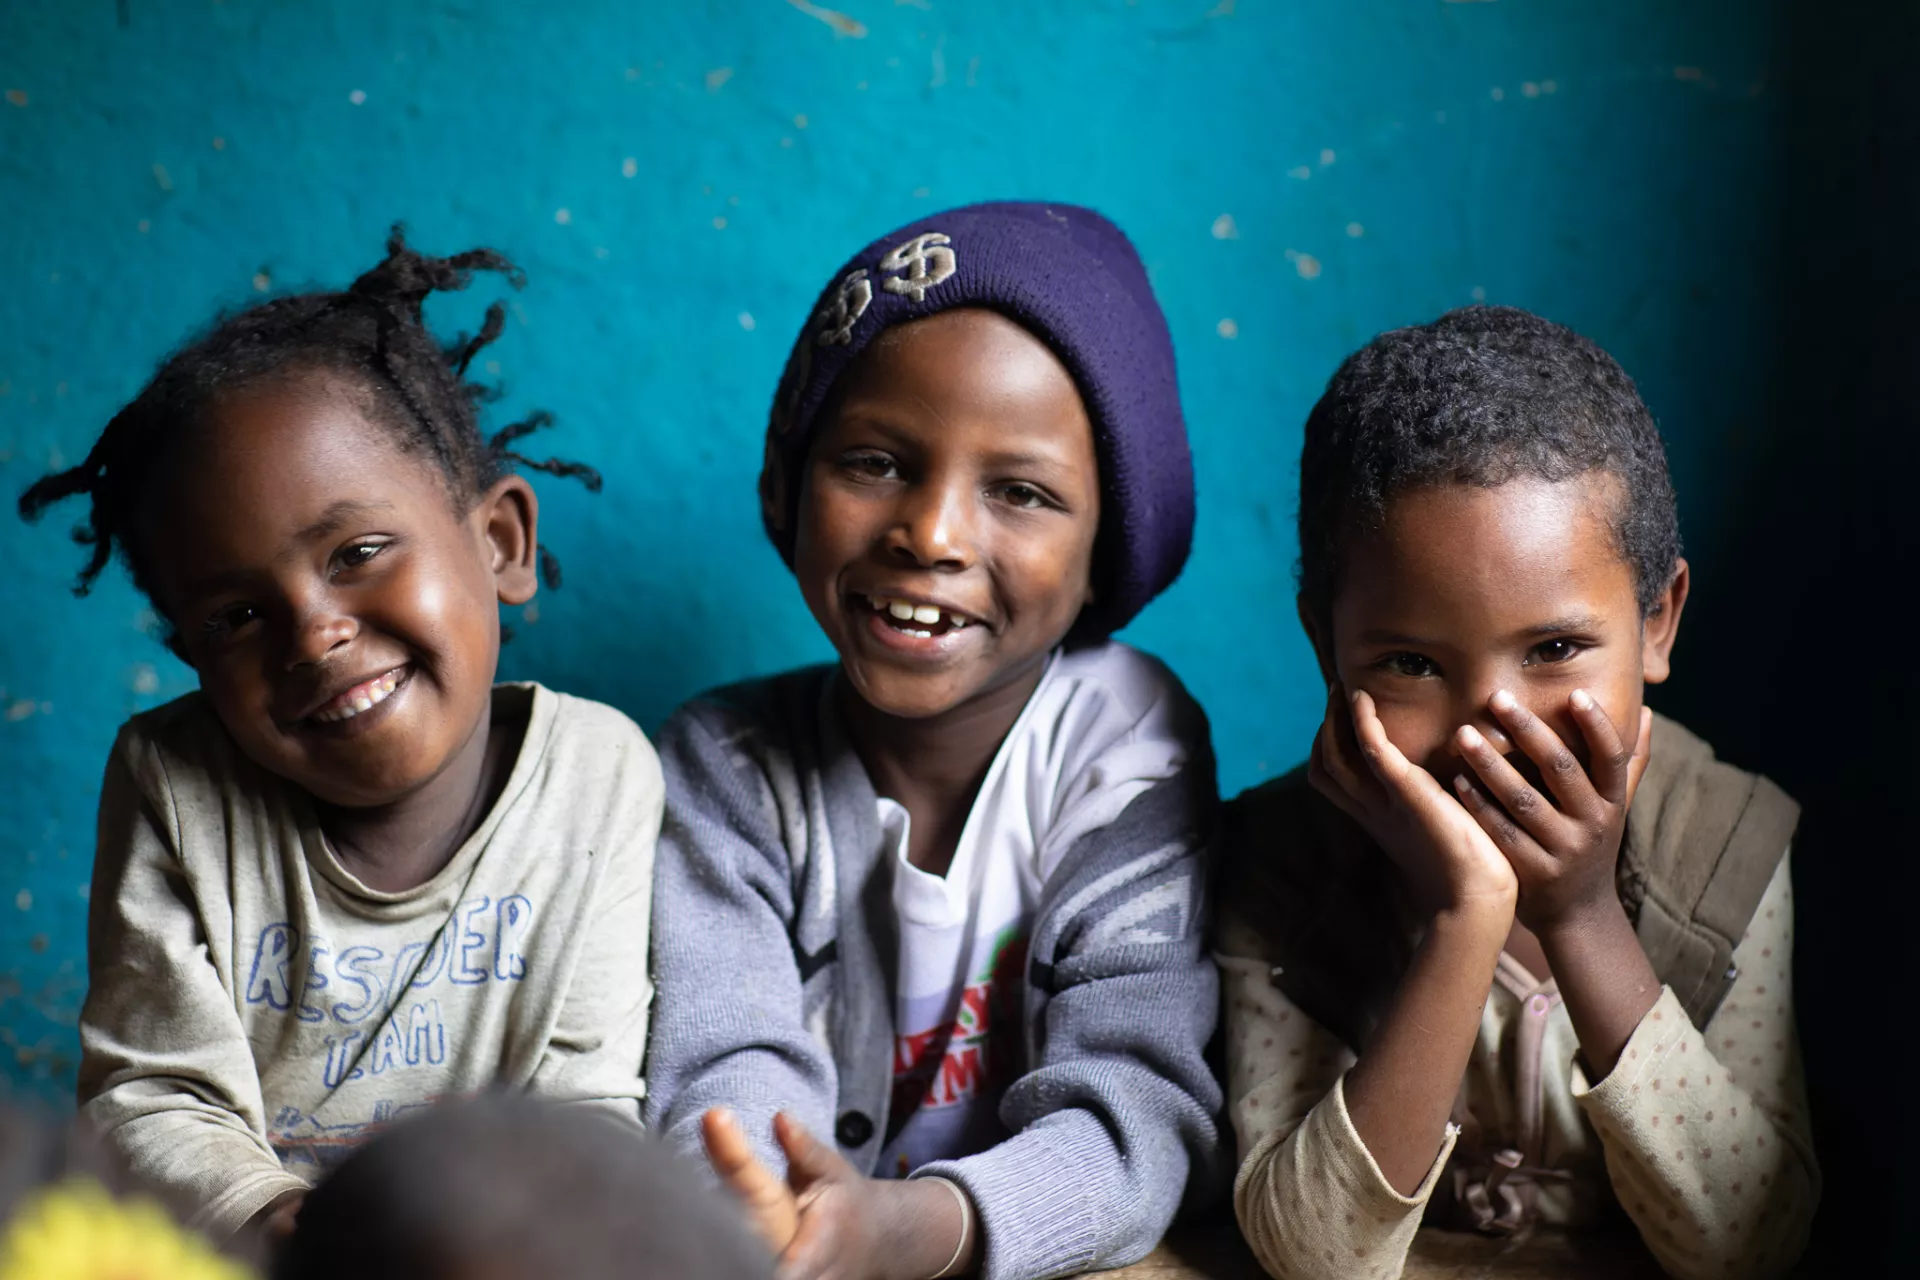 Three smiling young children in Ethiopia.